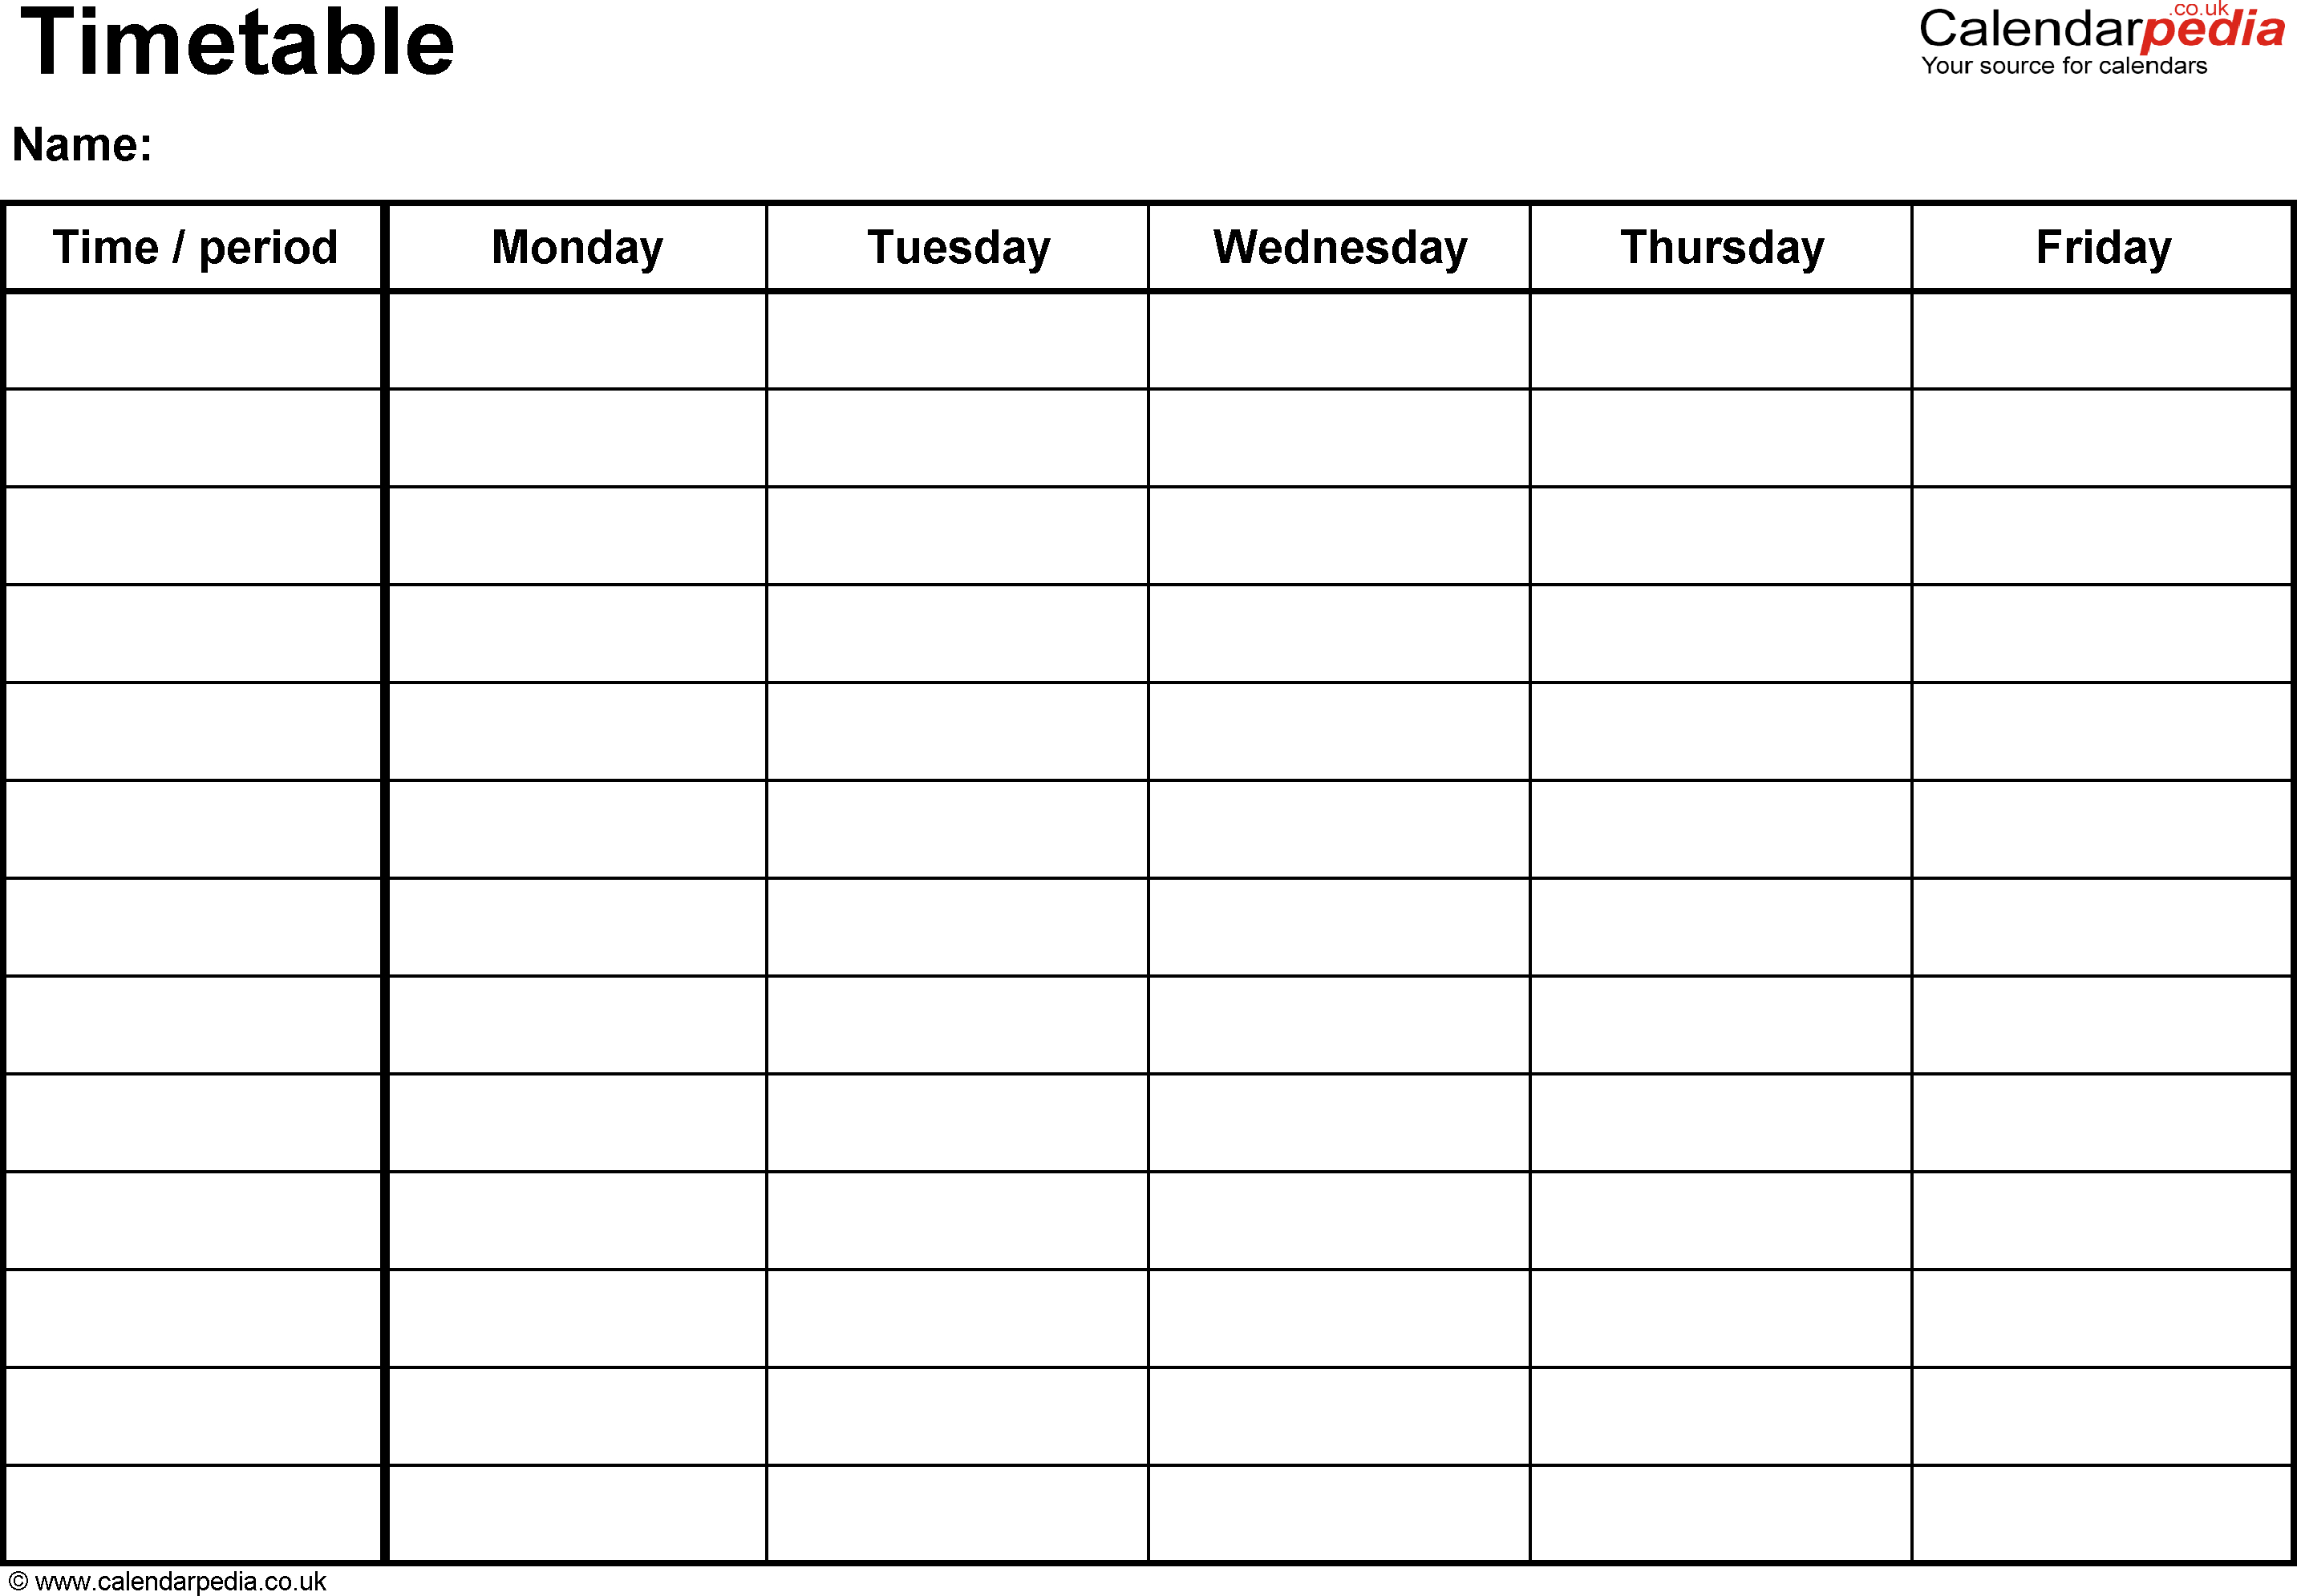 Timetable Spreadsheet Pertaining To Timetables As Free Printable Templates For Microsoft Excel